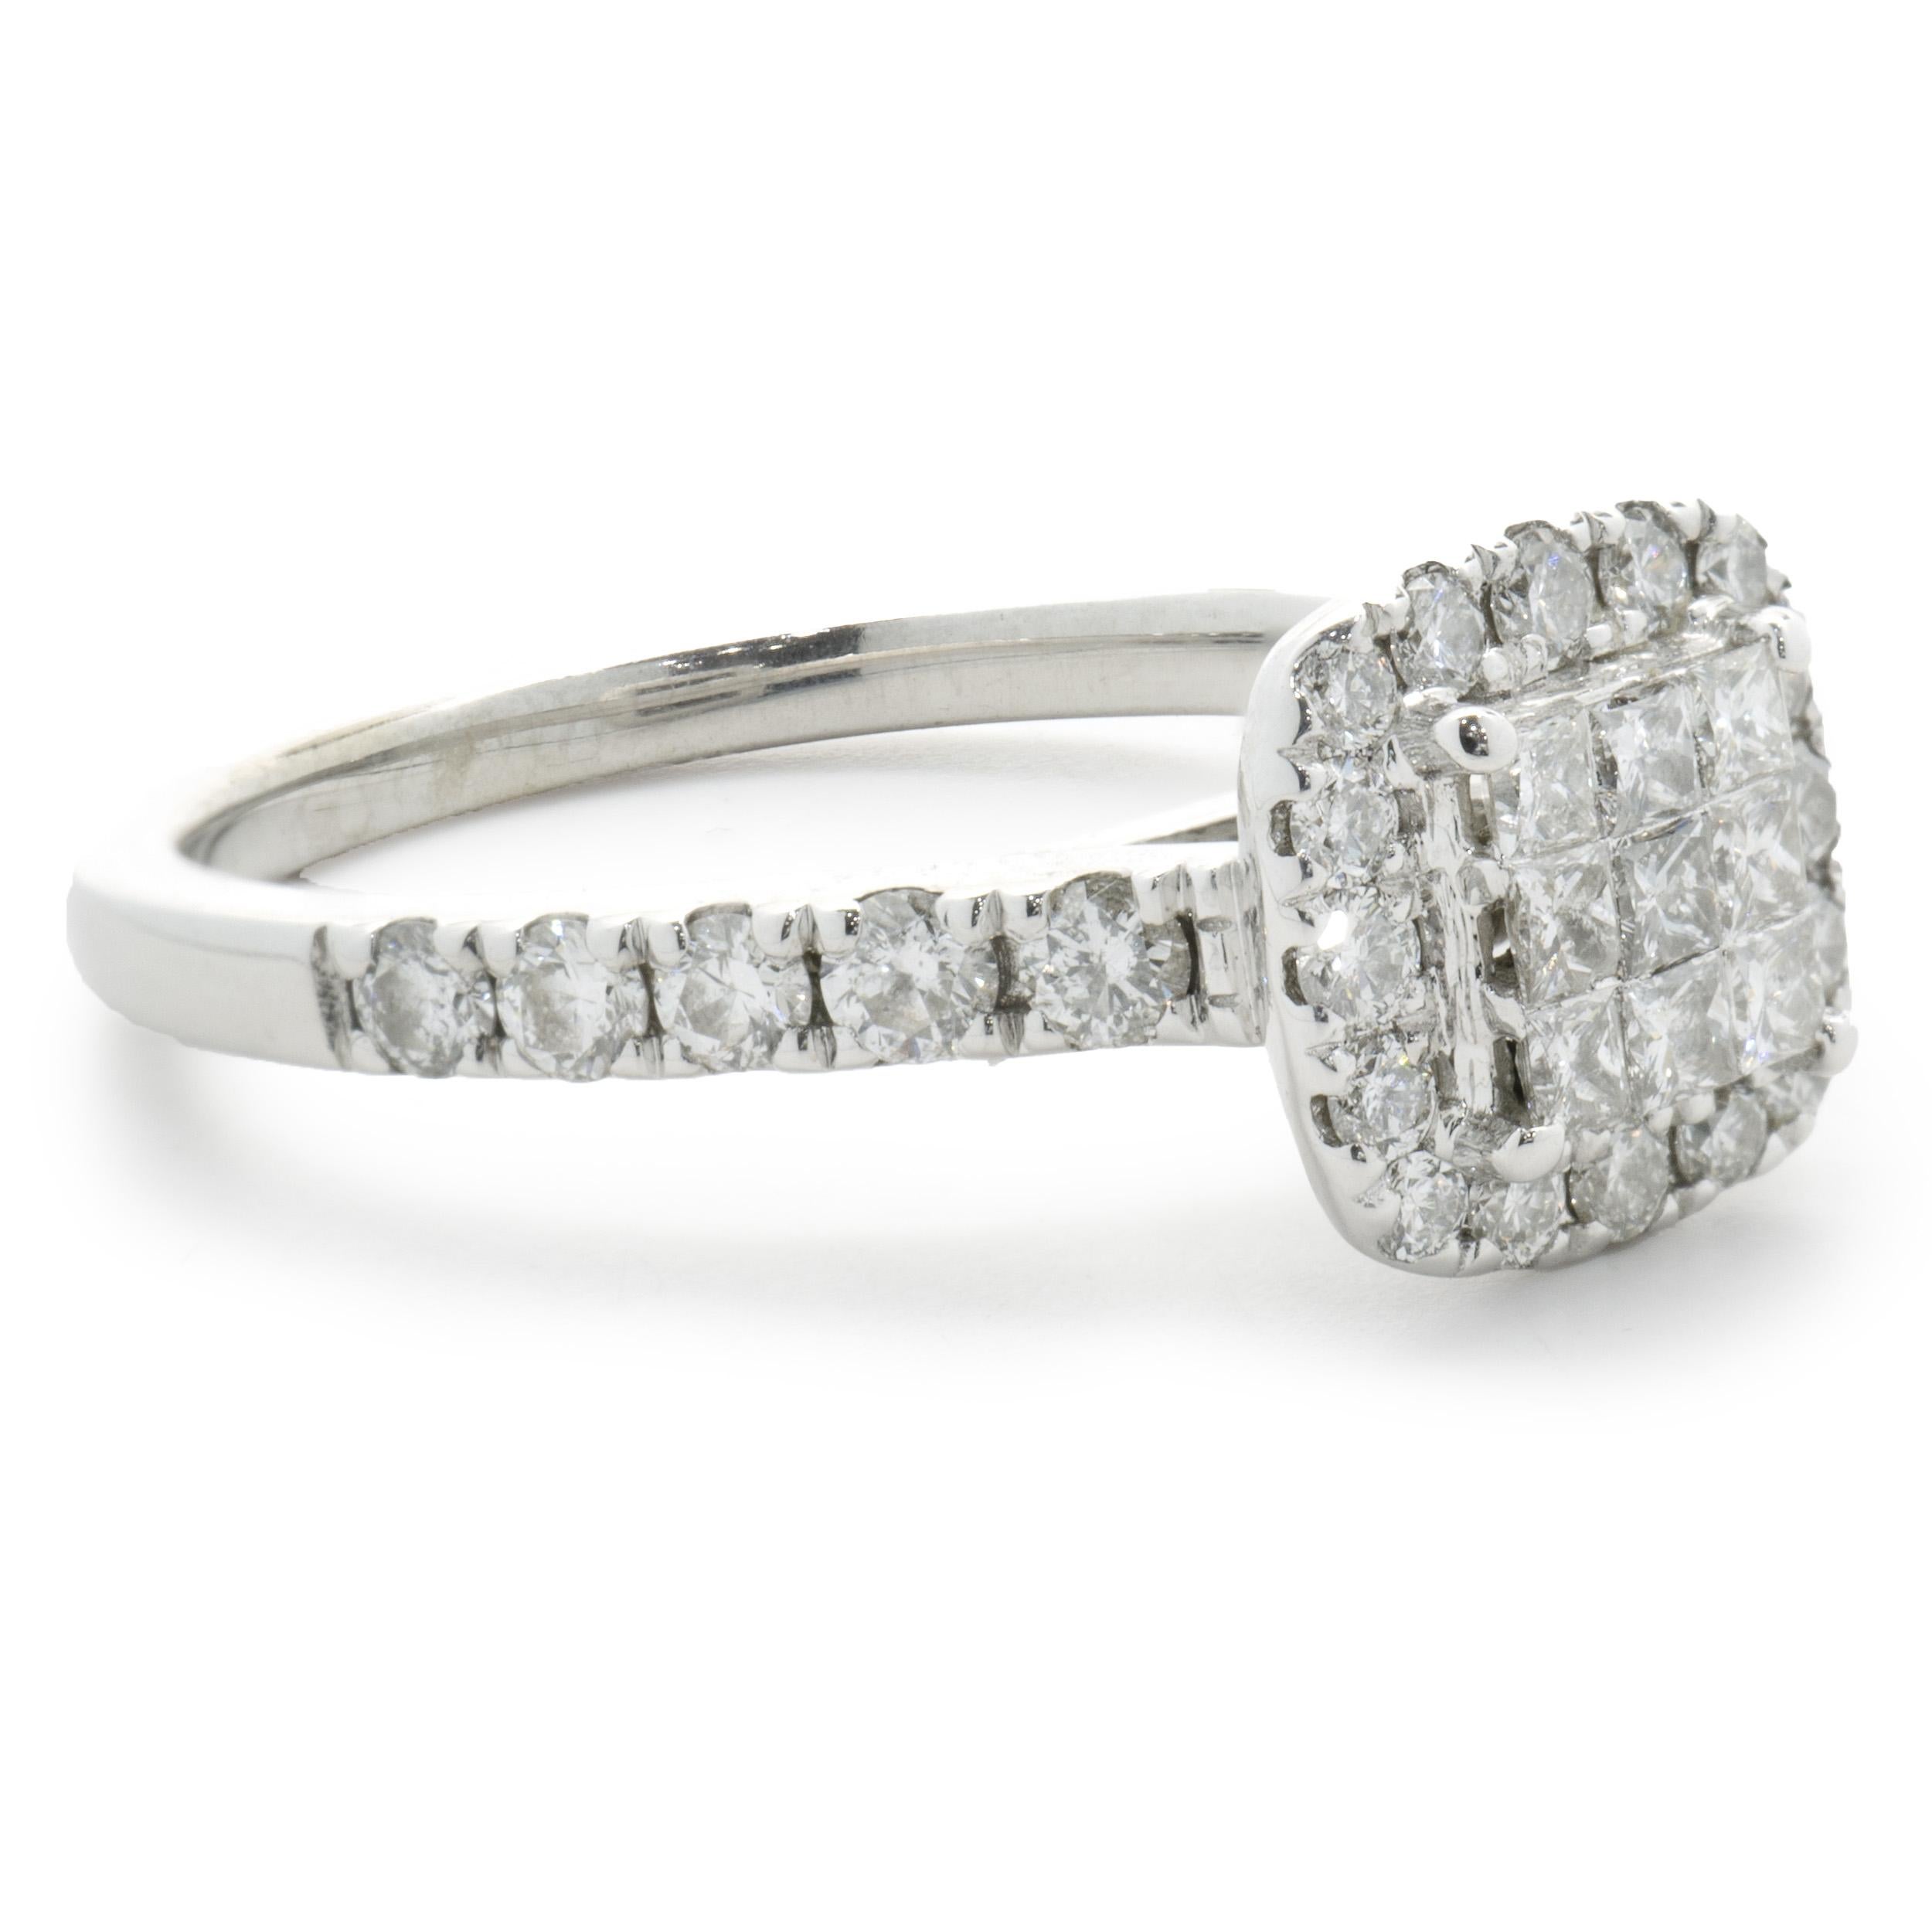 14 Karat White Gold Pave Diamond Engagement Ring In Excellent Condition For Sale In Scottsdale, AZ